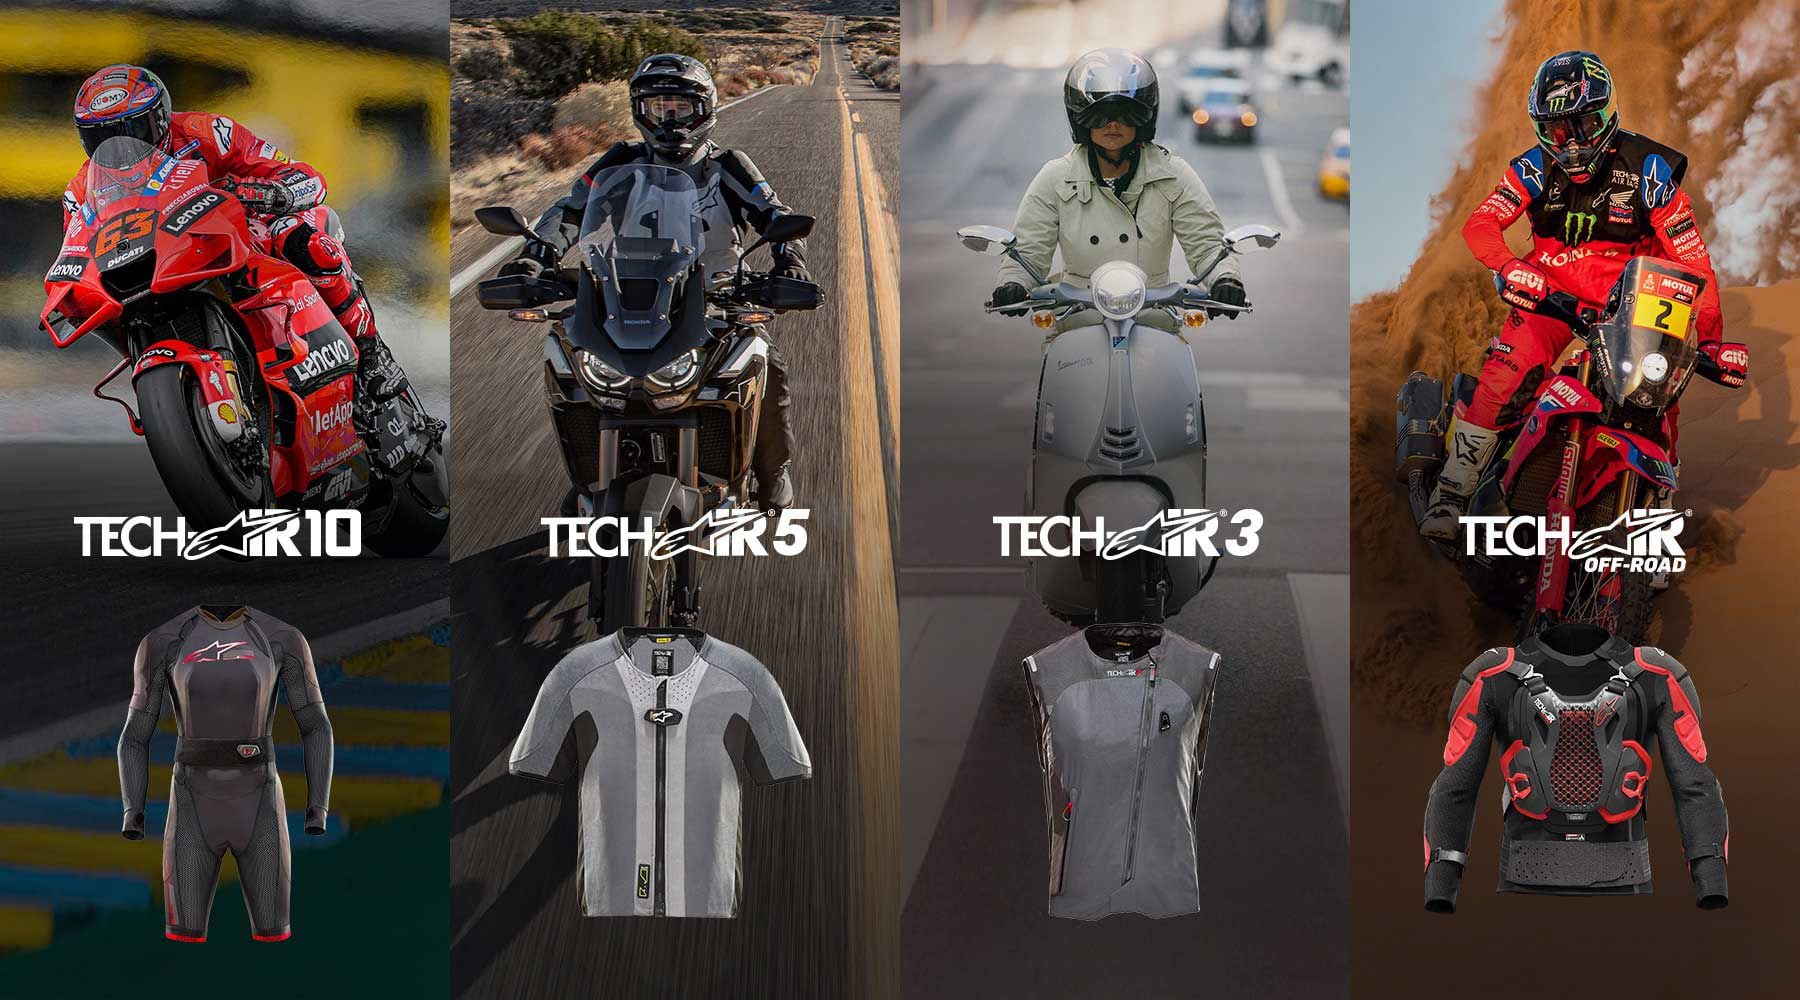 The Alpinestars Tech-Air family expands with three new pieces.